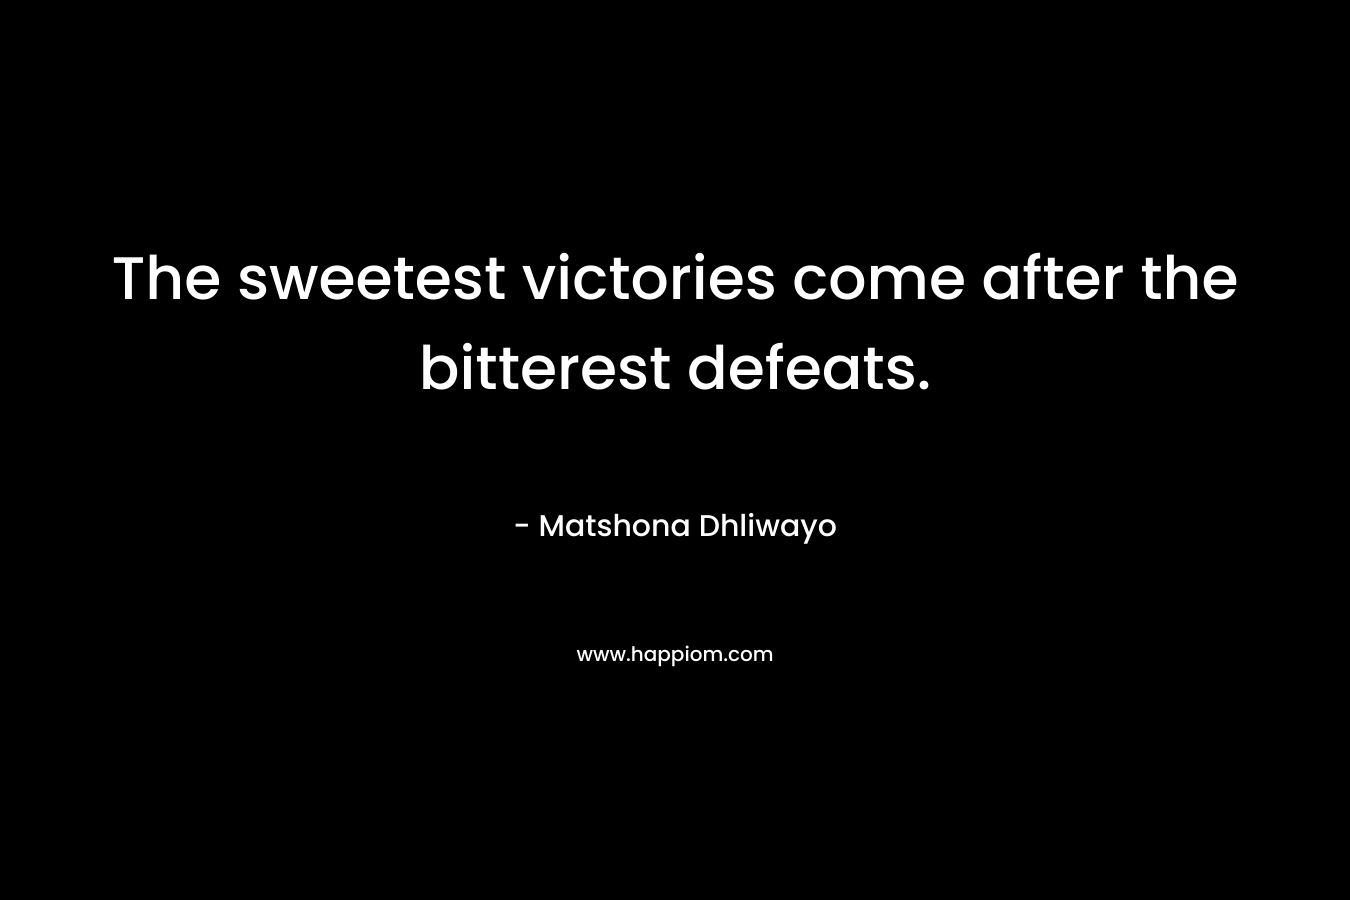 The sweetest victories come after the bitterest defeats. – Matshona Dhliwayo